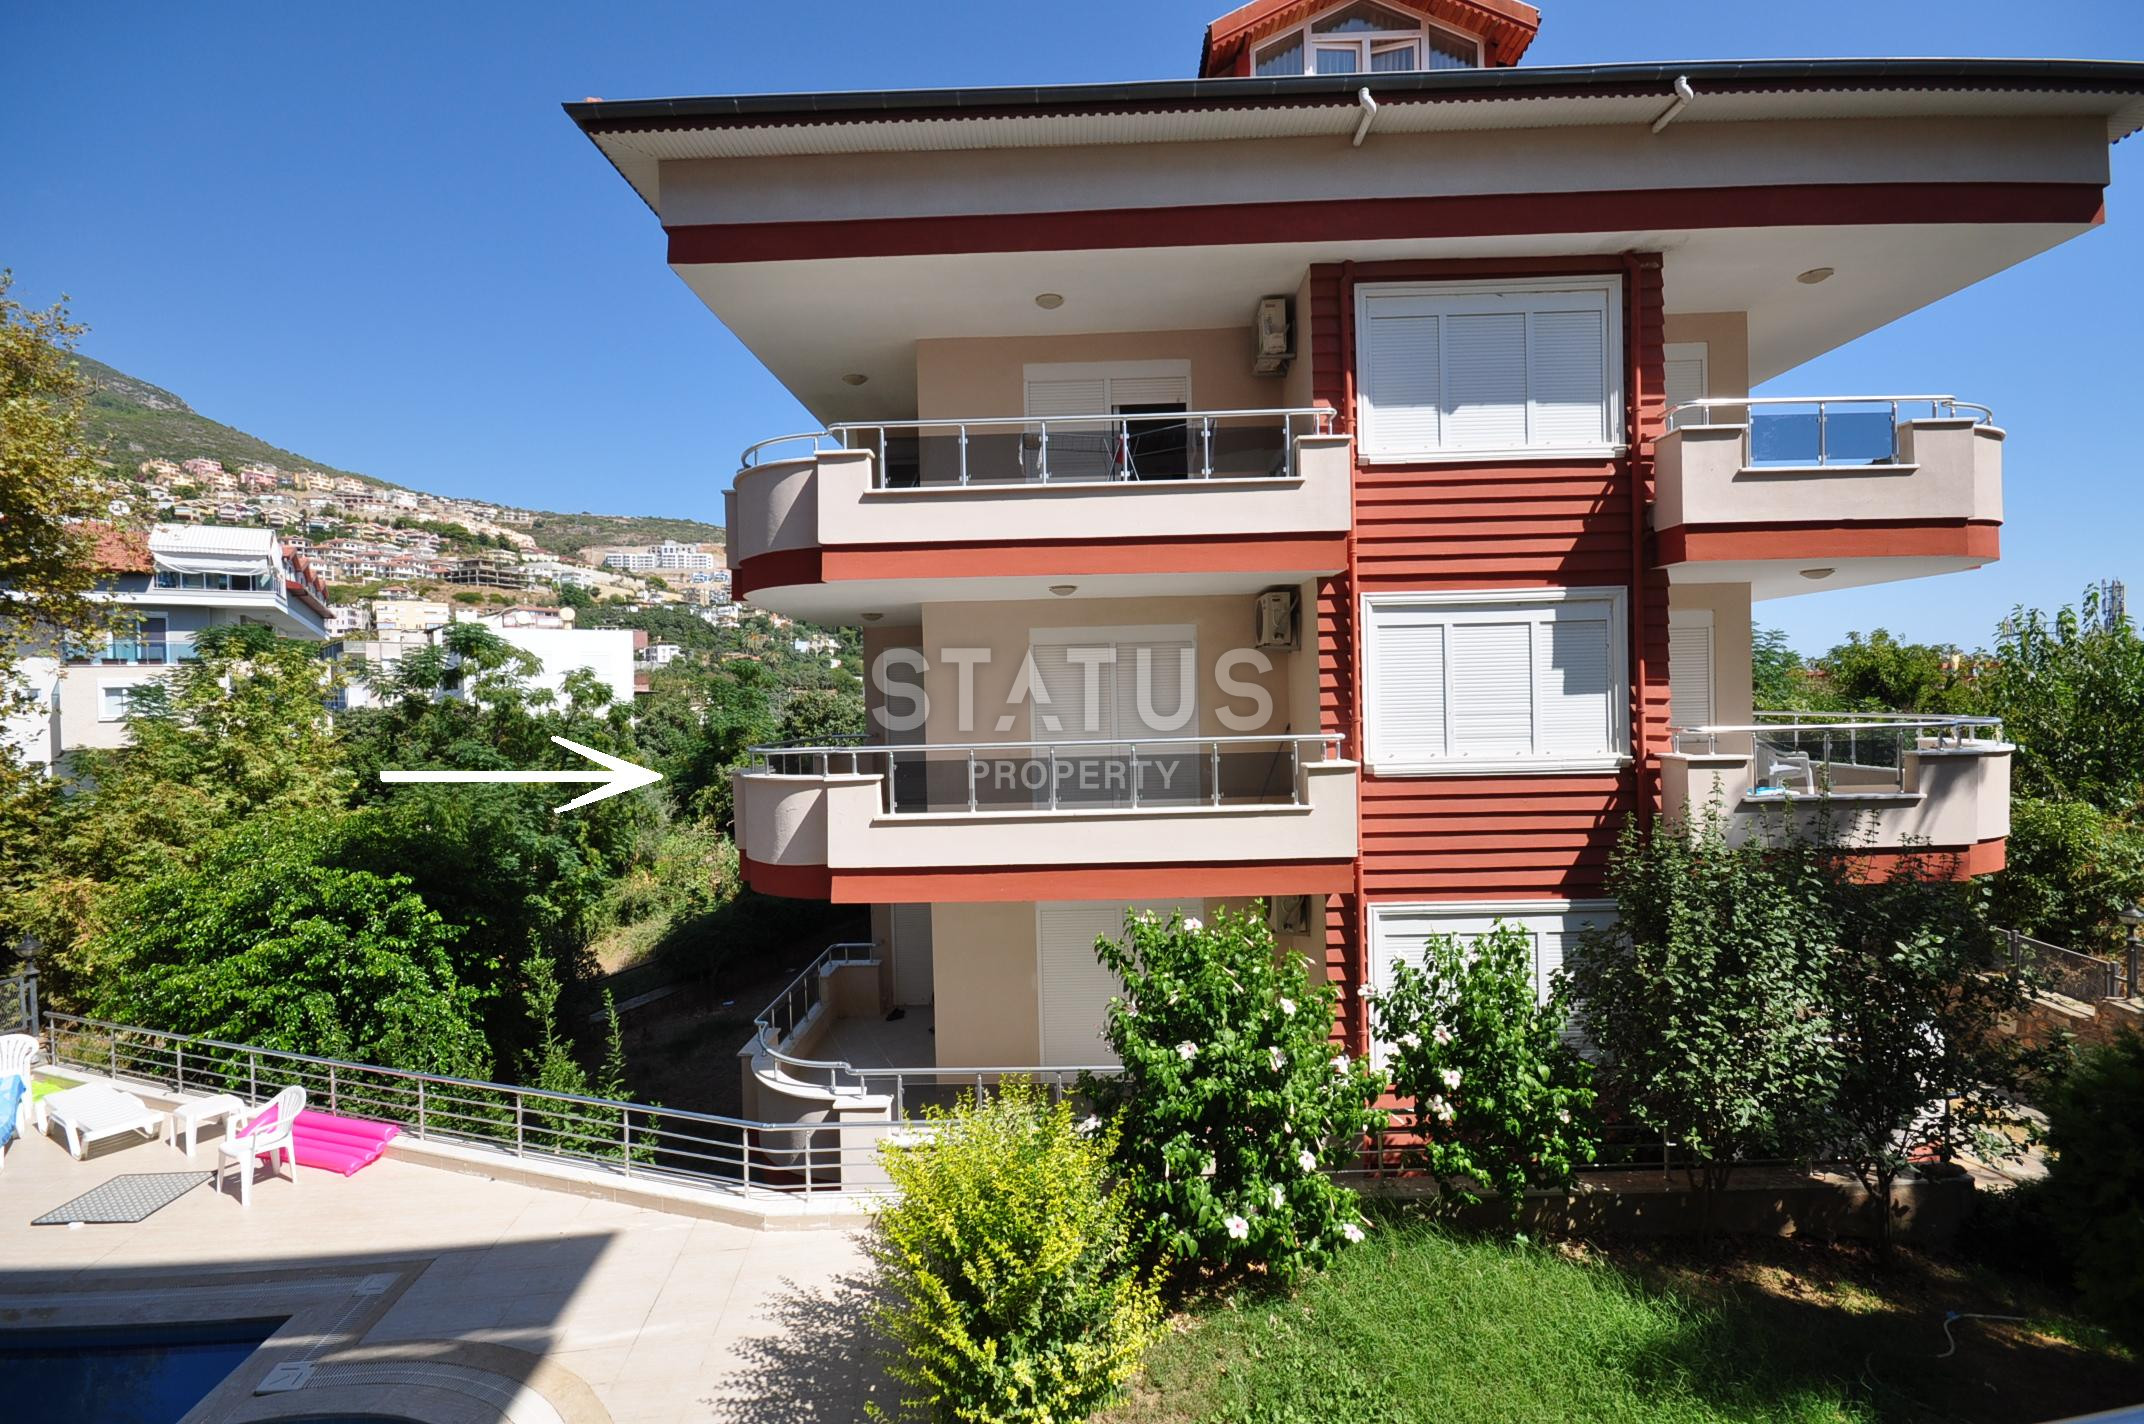 Three-room turnkey apartment in the Sugözü neighborhood in the center of Alanya. 100m2 фото 1